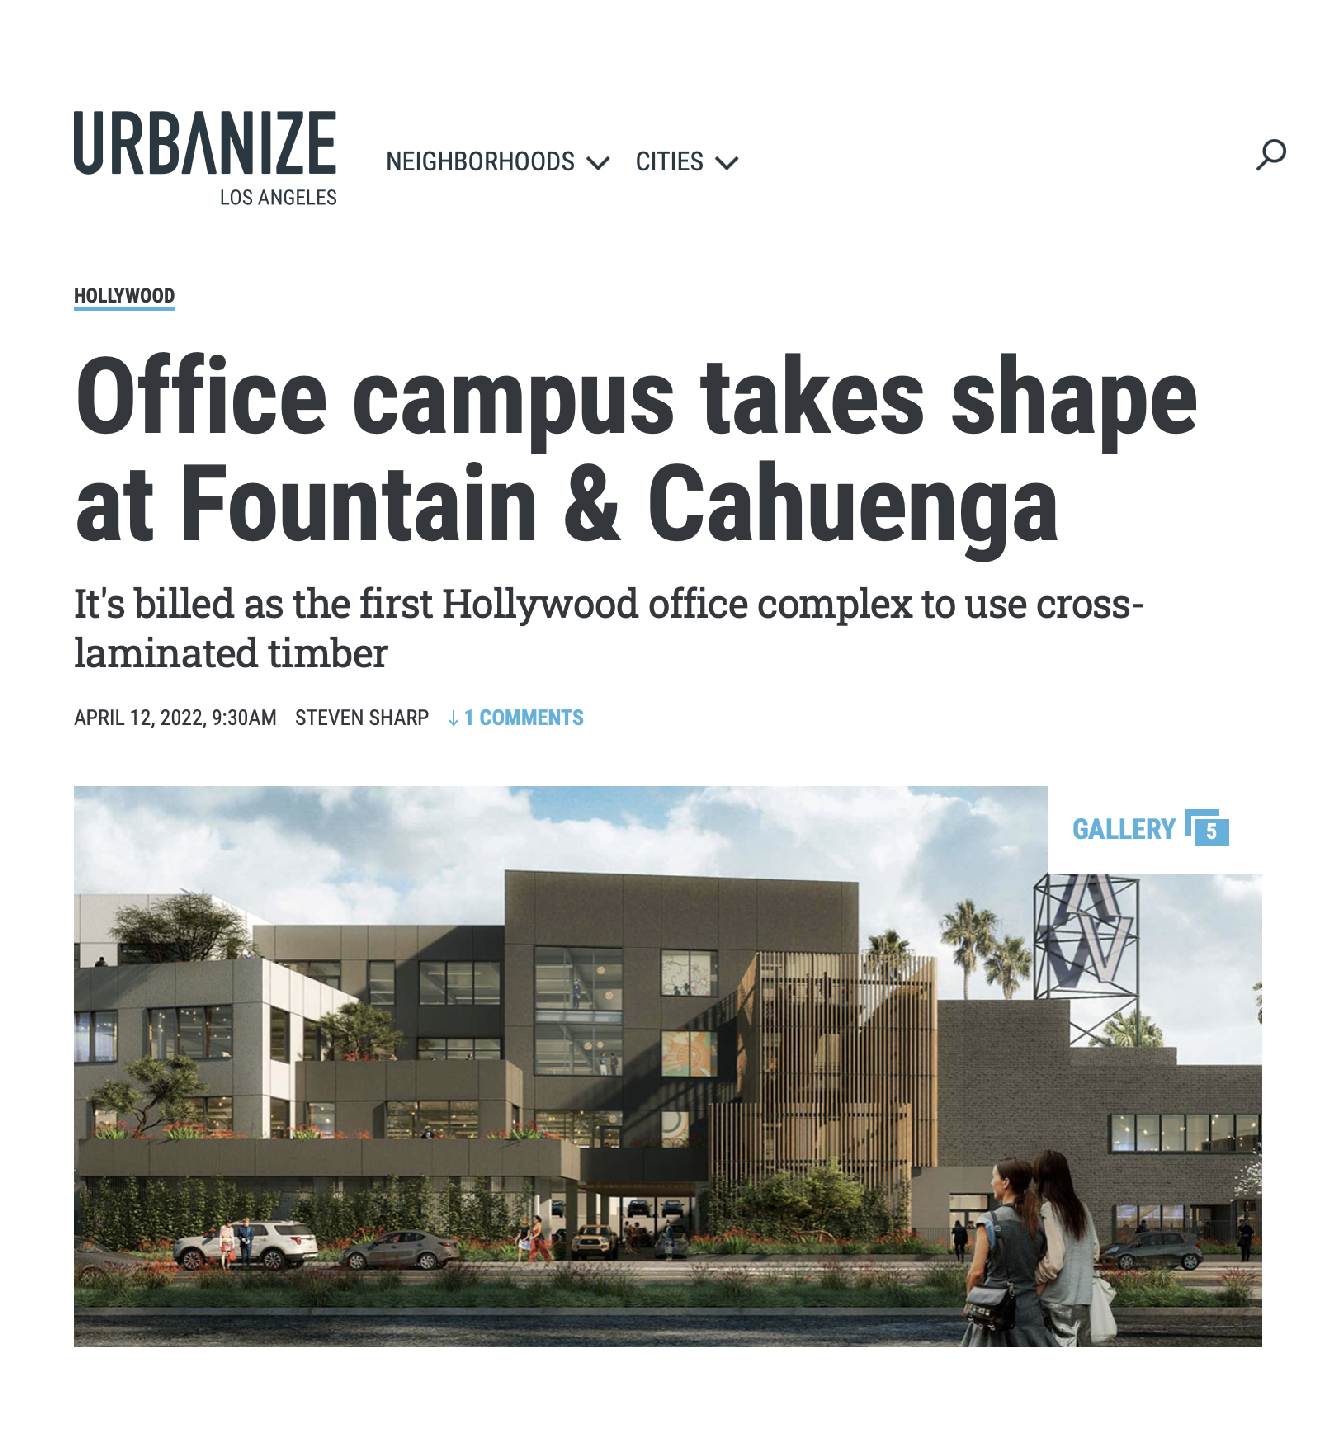 Office campus takes shape at Fountain & Cahuenga